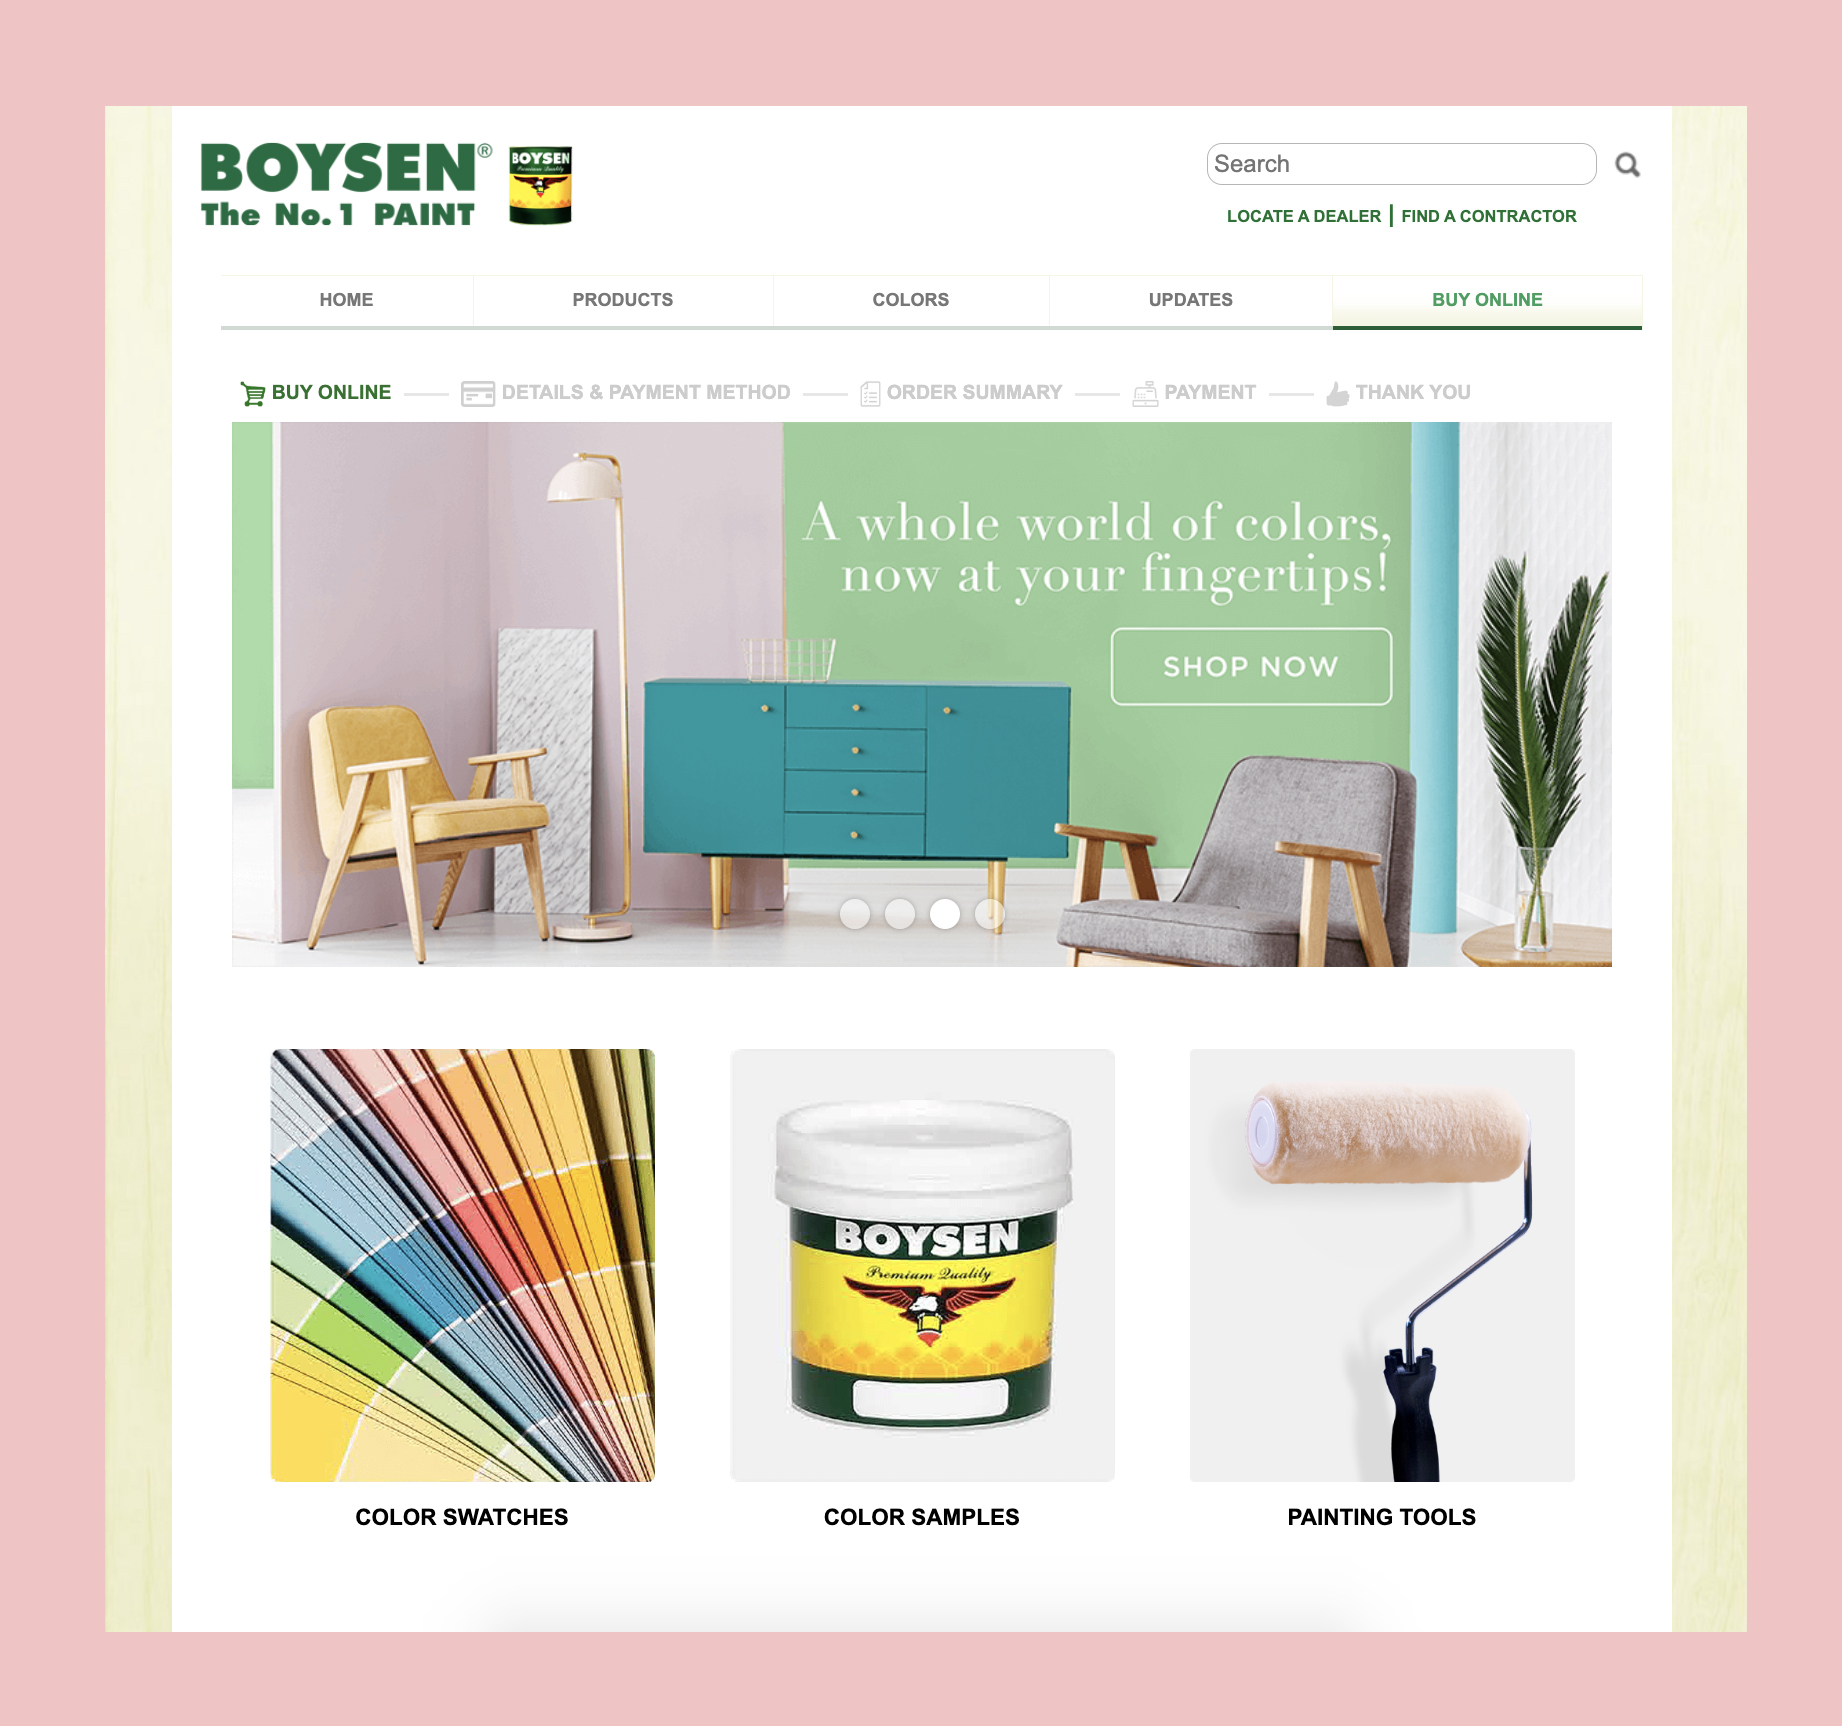 Add to Cart! You Can Shop for These Paint Tools on the Boysen Website | MyBoysen